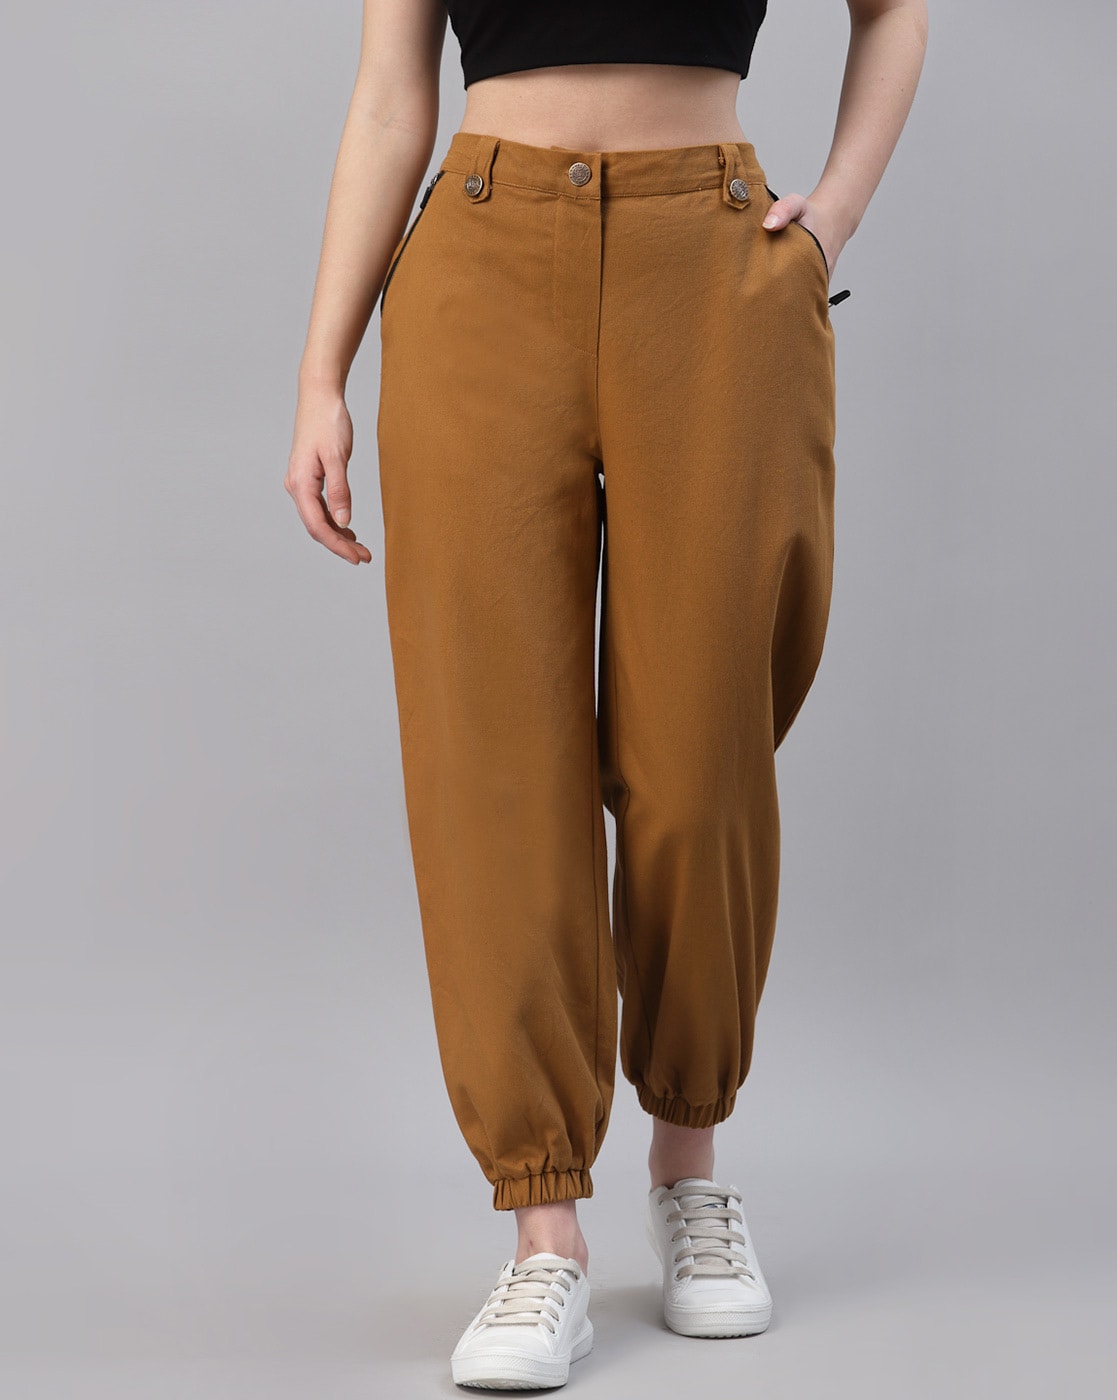 30 Great Outfits Ideas With Brown Pants for Women in 2023  Hood MWR